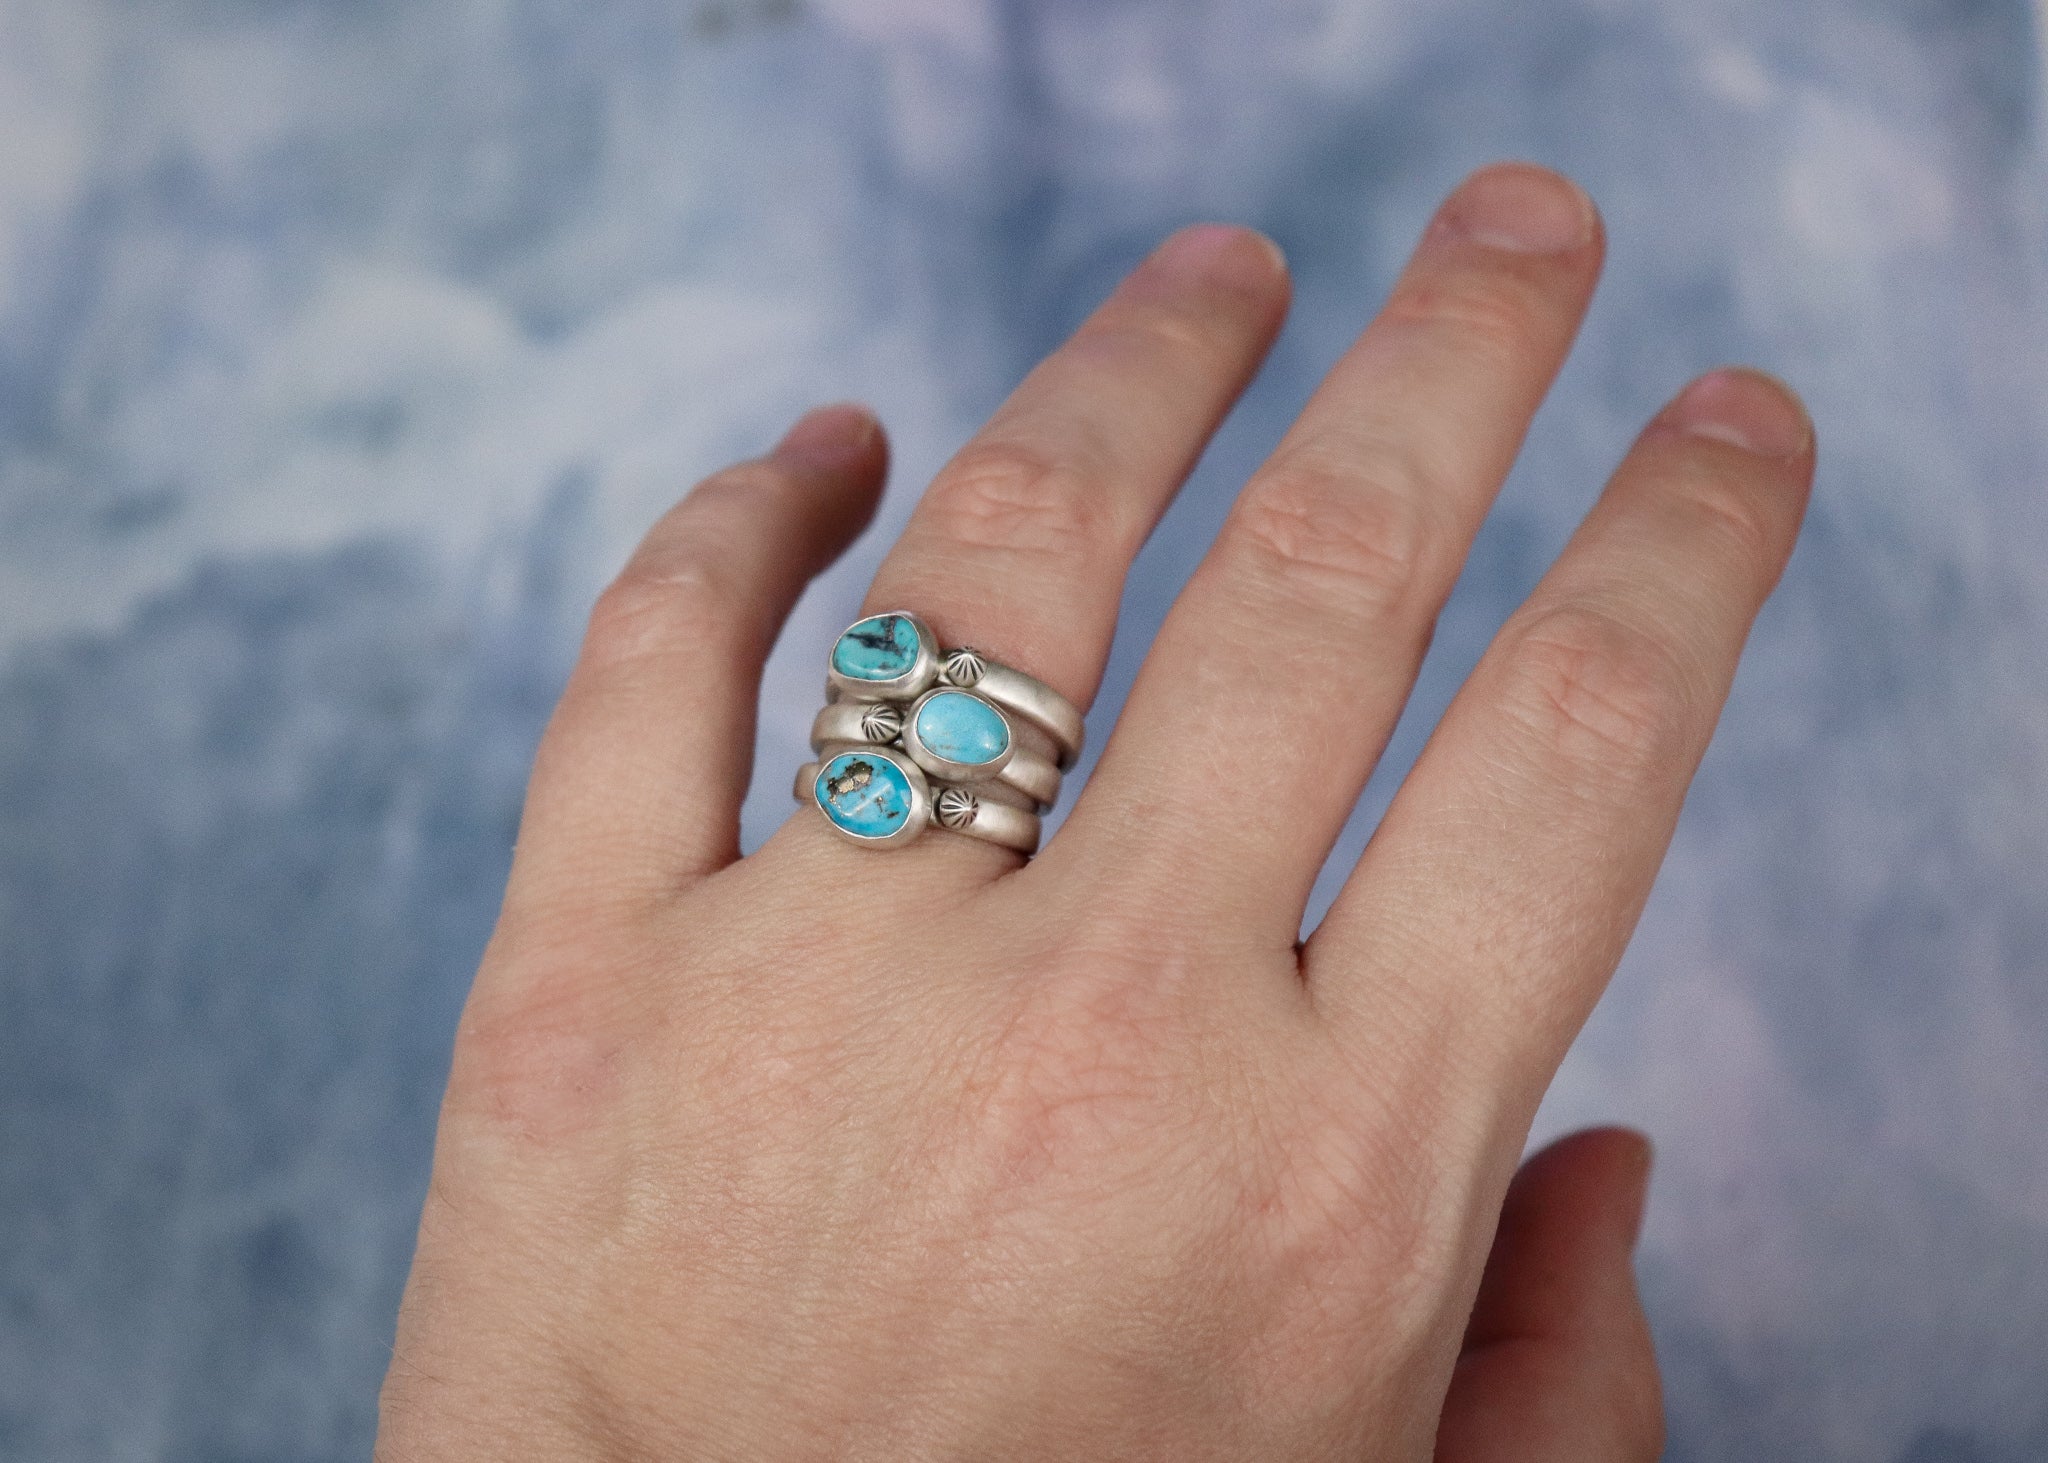 Starburst Ring with Castle Dome Turquoise - Size 7